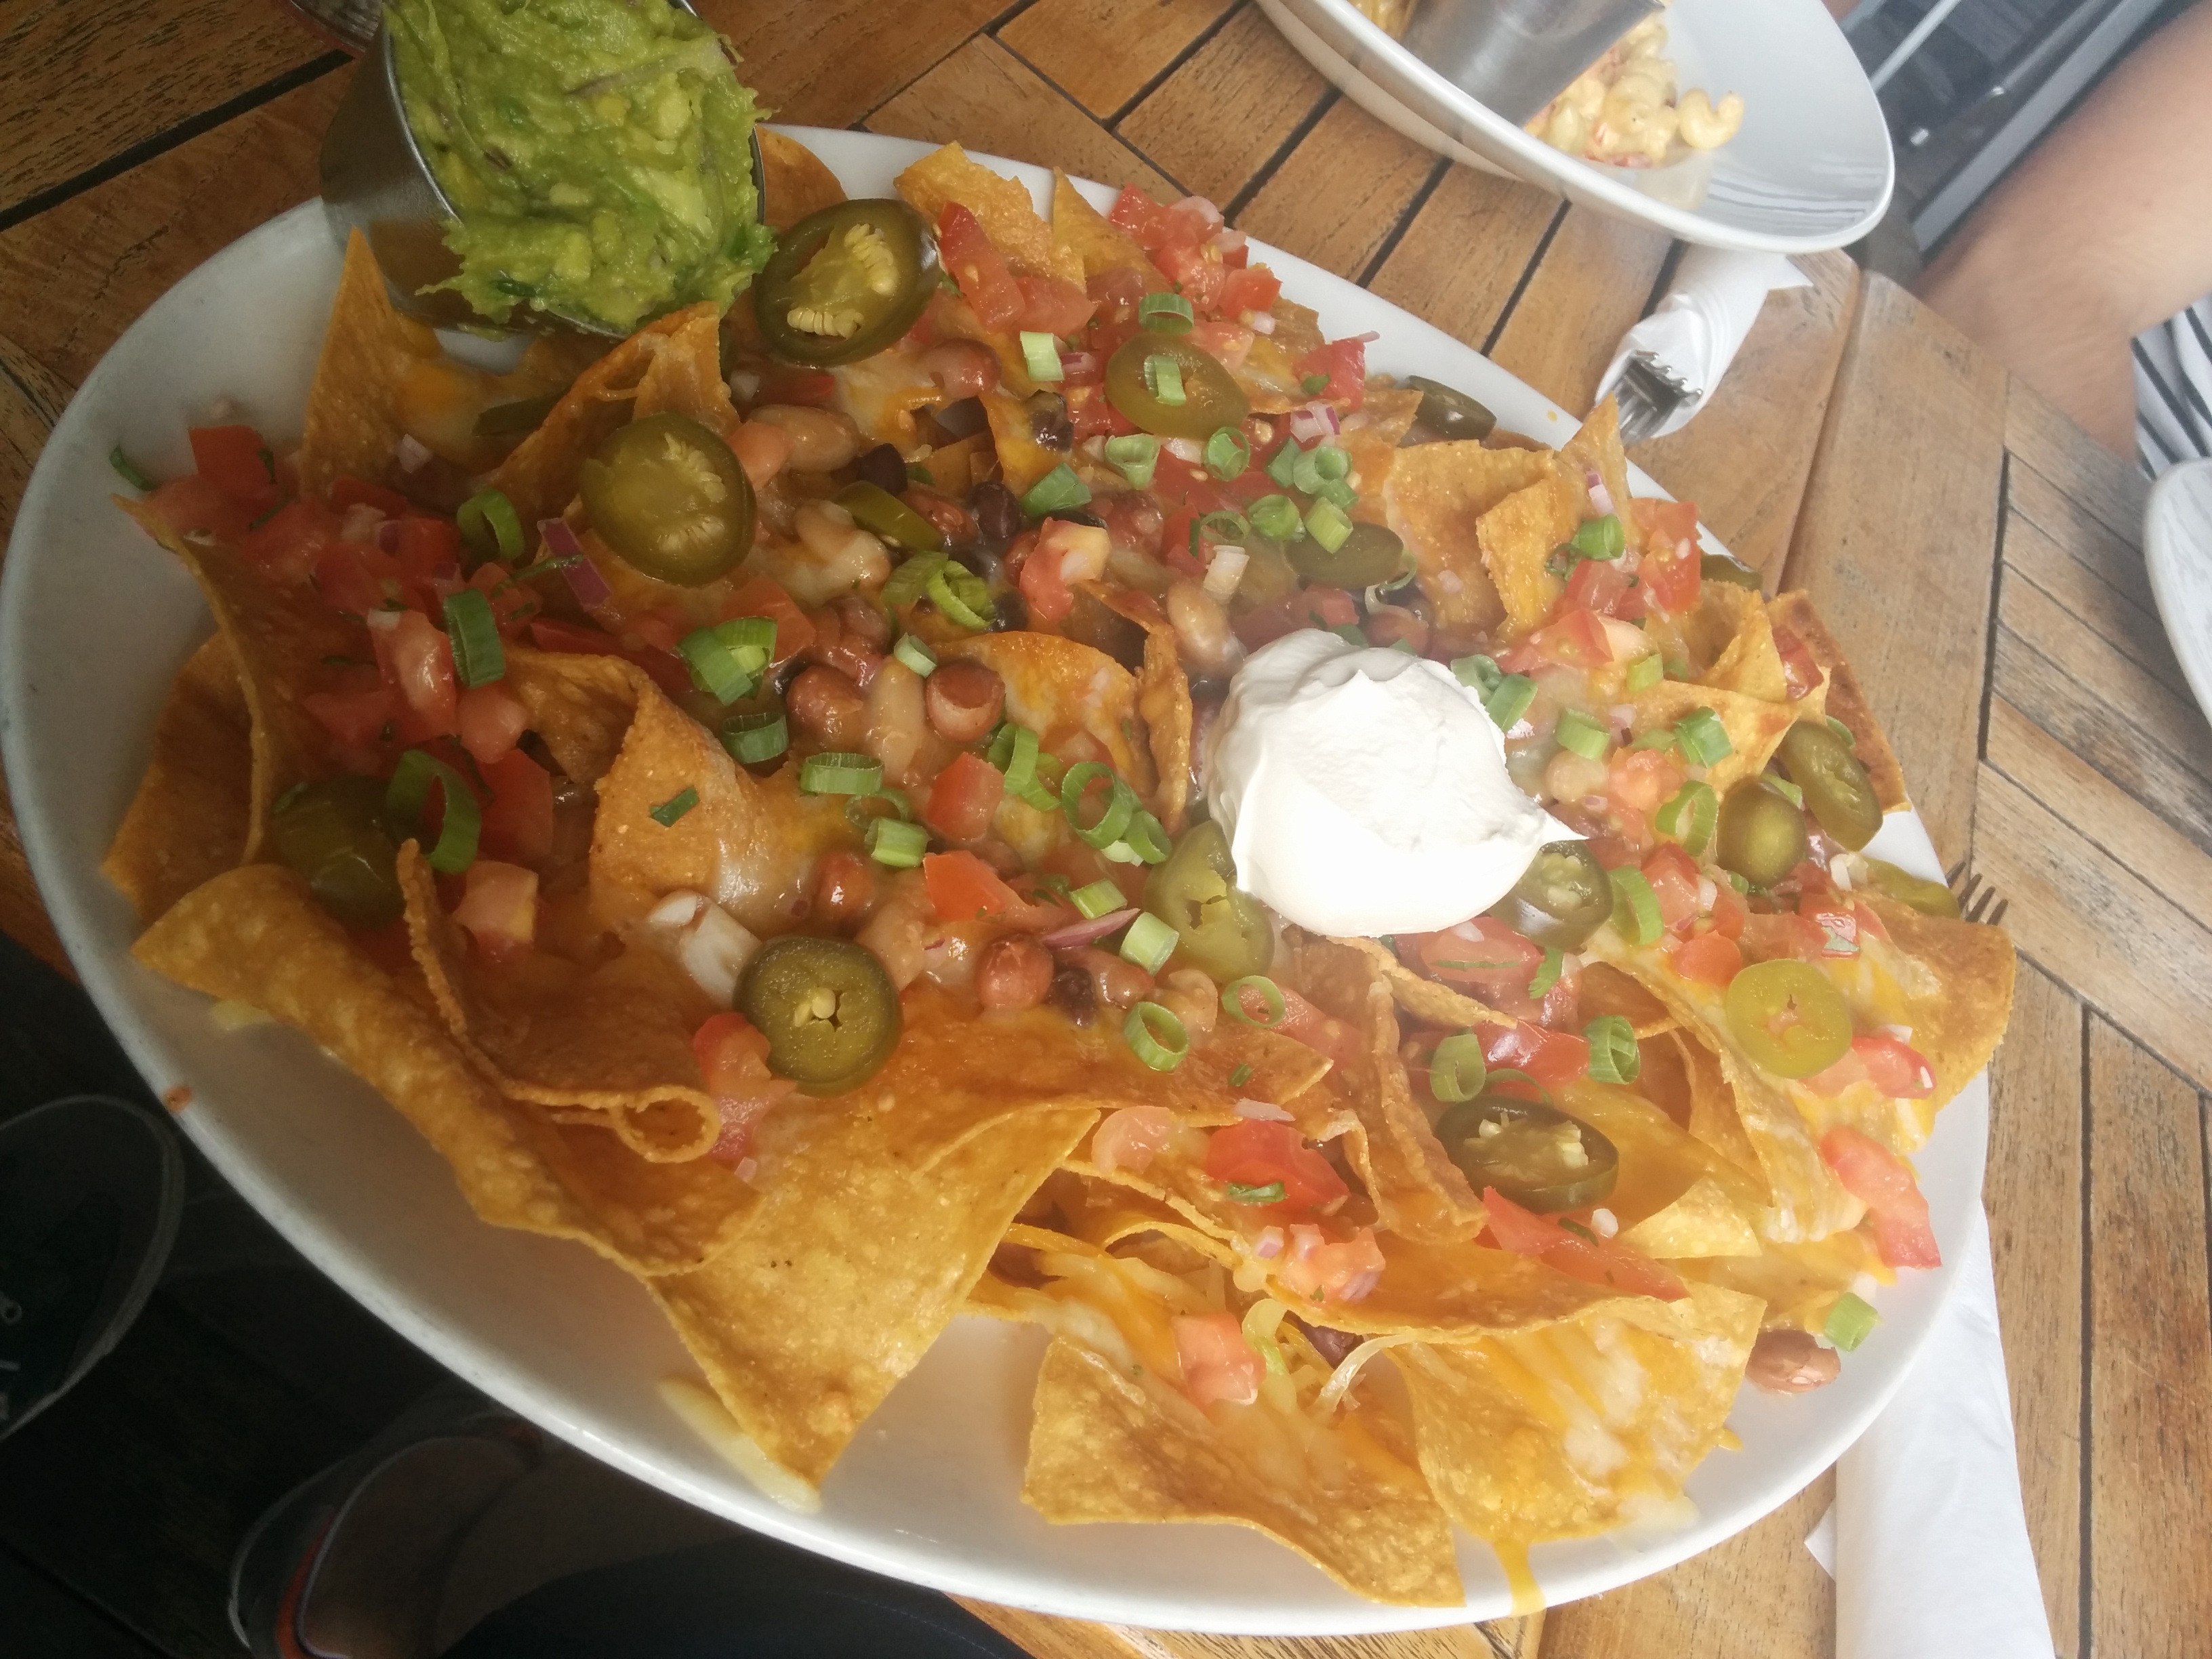 Nachos, we were afraid it's going to be to little .... needles to say we ate 1/4 of it.